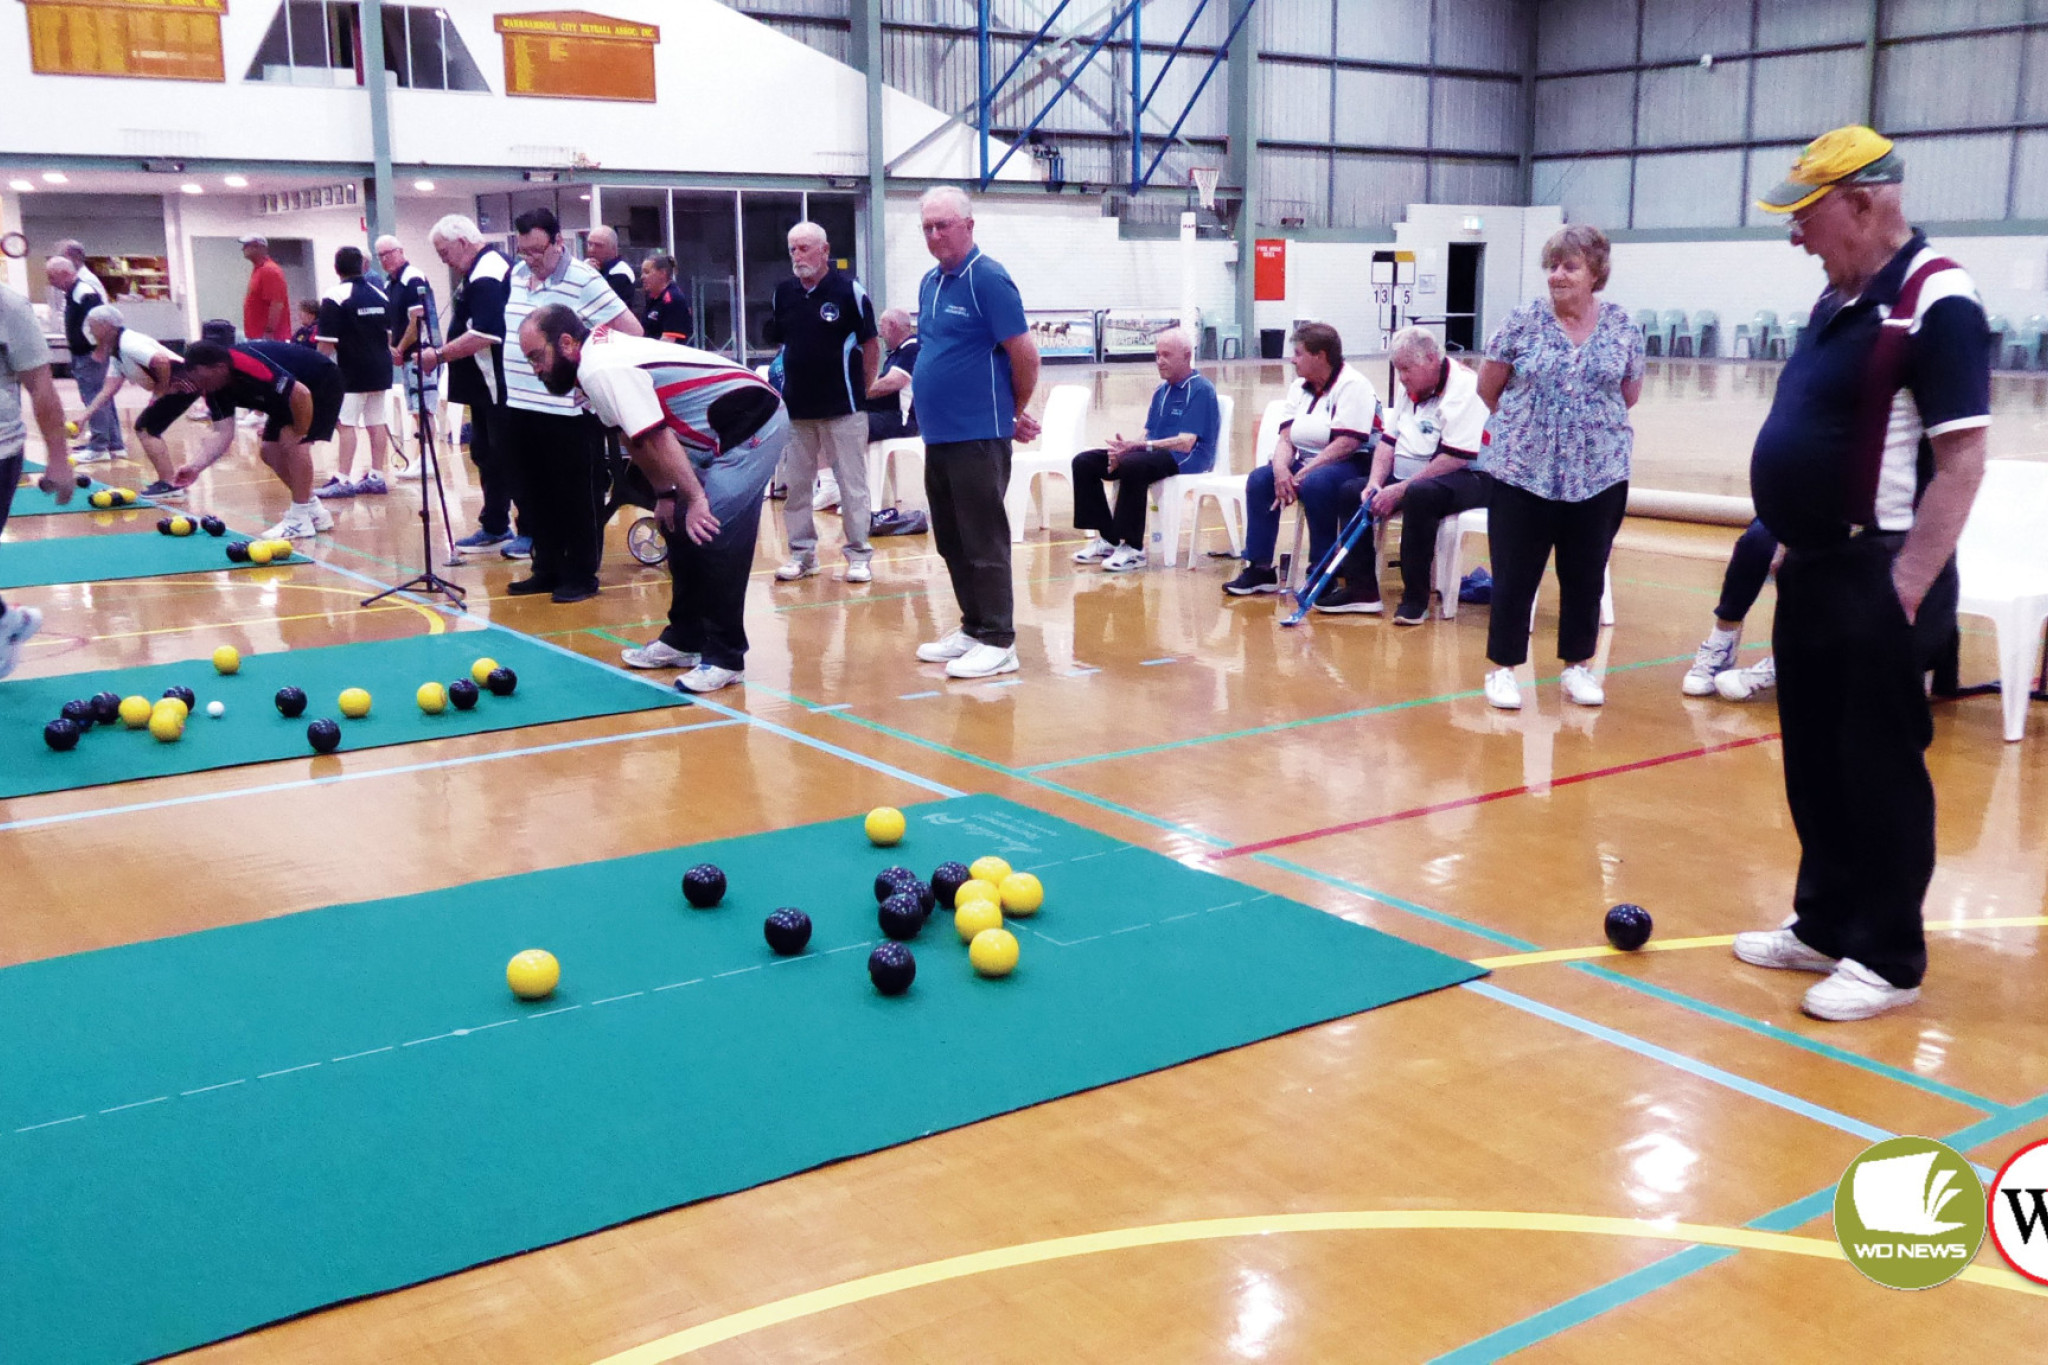 Finals for indoor bowls - feature photo